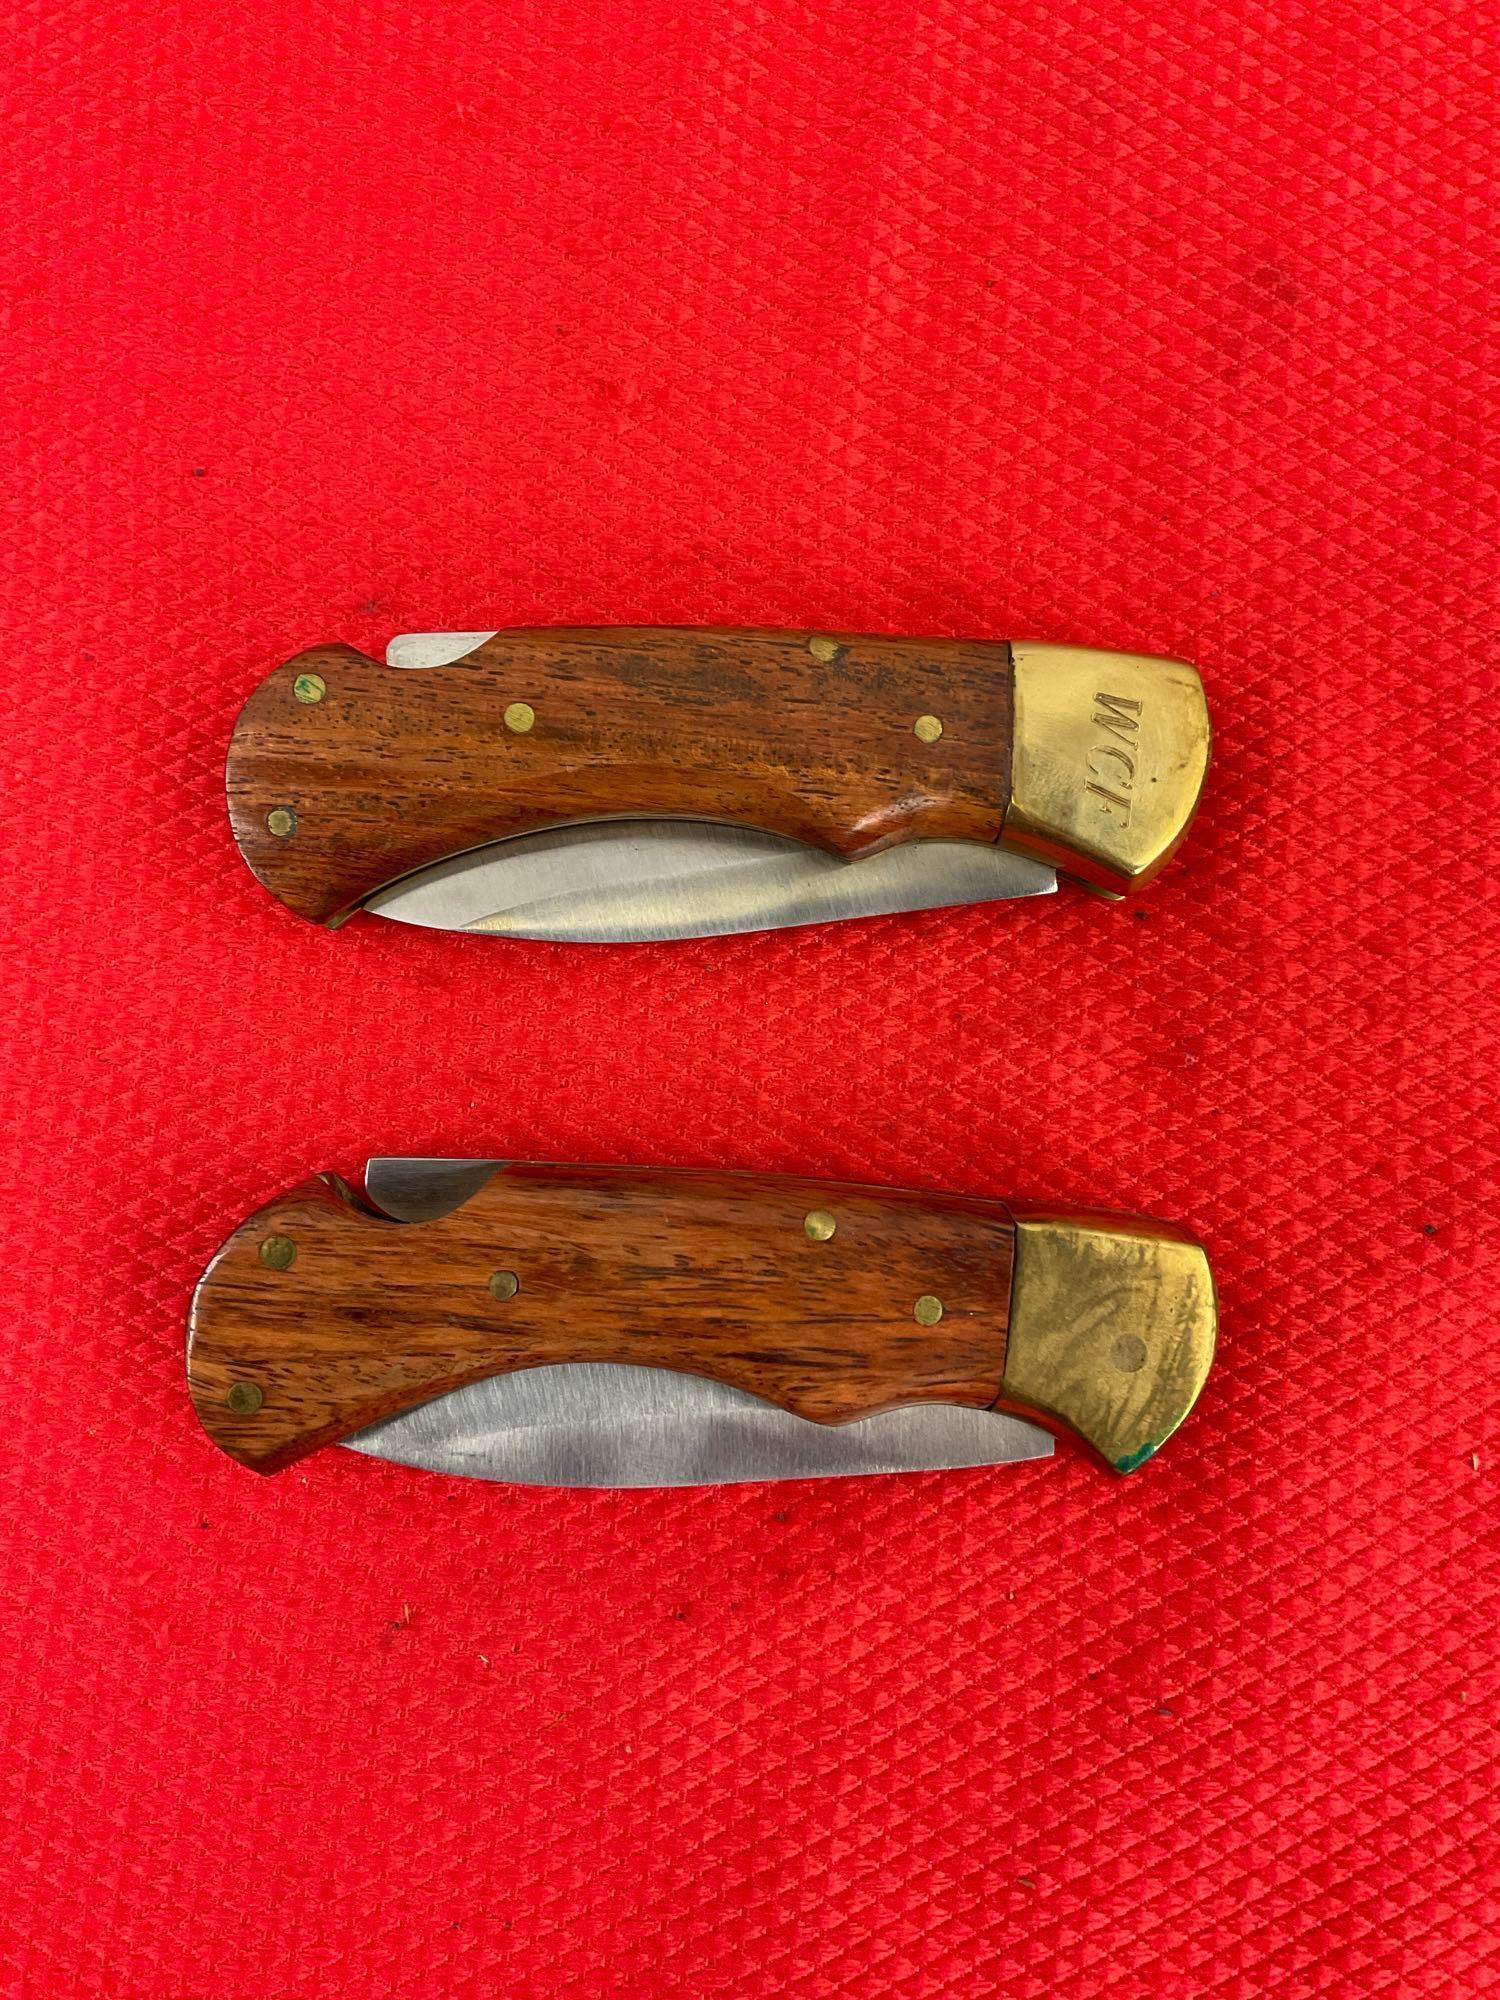 2x Unknown Maker 2.5" Stainless Steel Folding Blade Pocket Knives w/ Sheathes. No Hallmarks. See